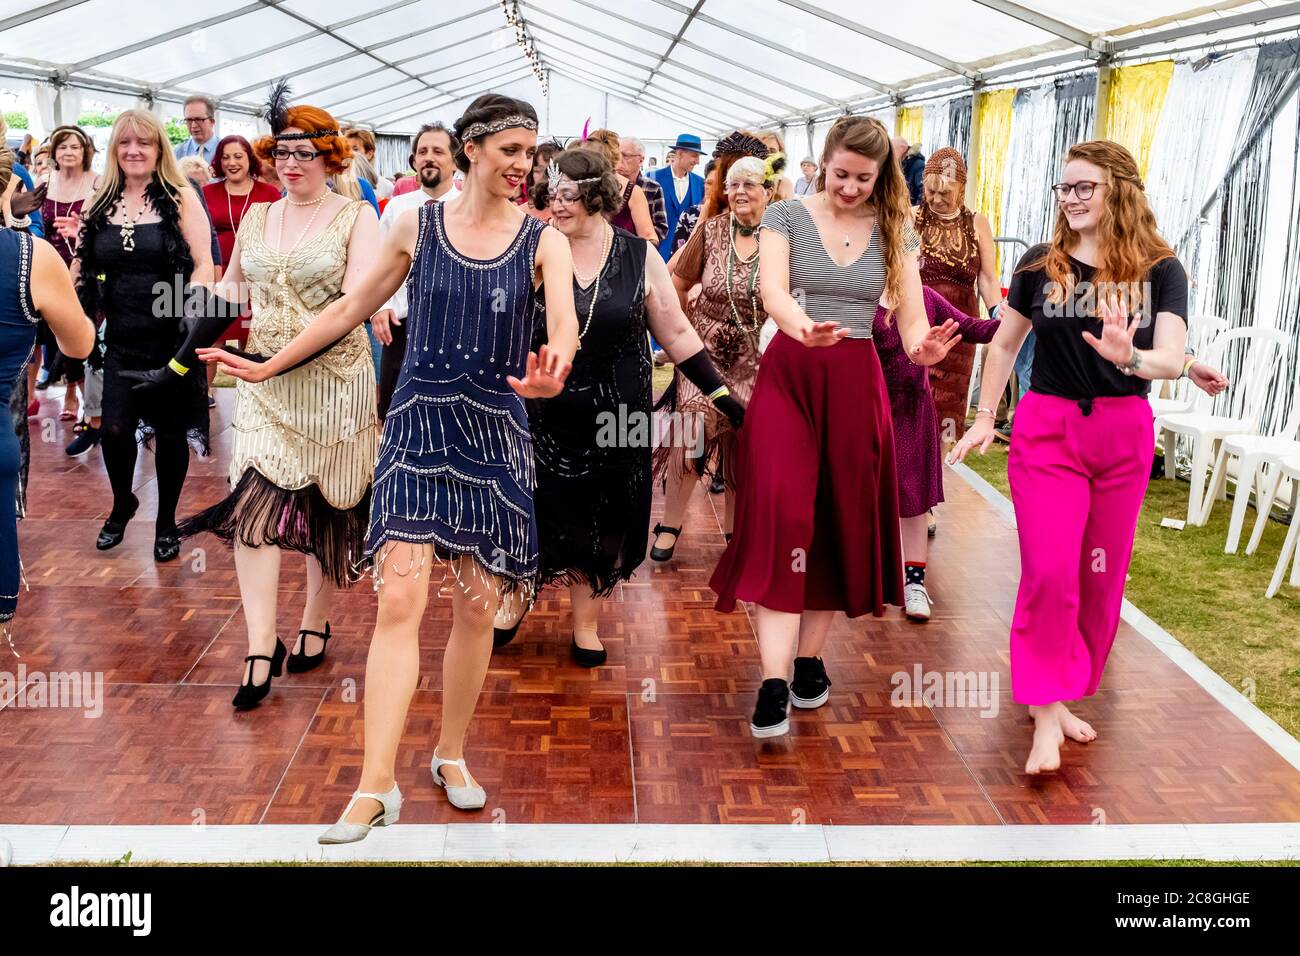 Women Dancing At The Great Gatsby Fair, Bexhill on Sea, East Sussex, UK Stock Photo